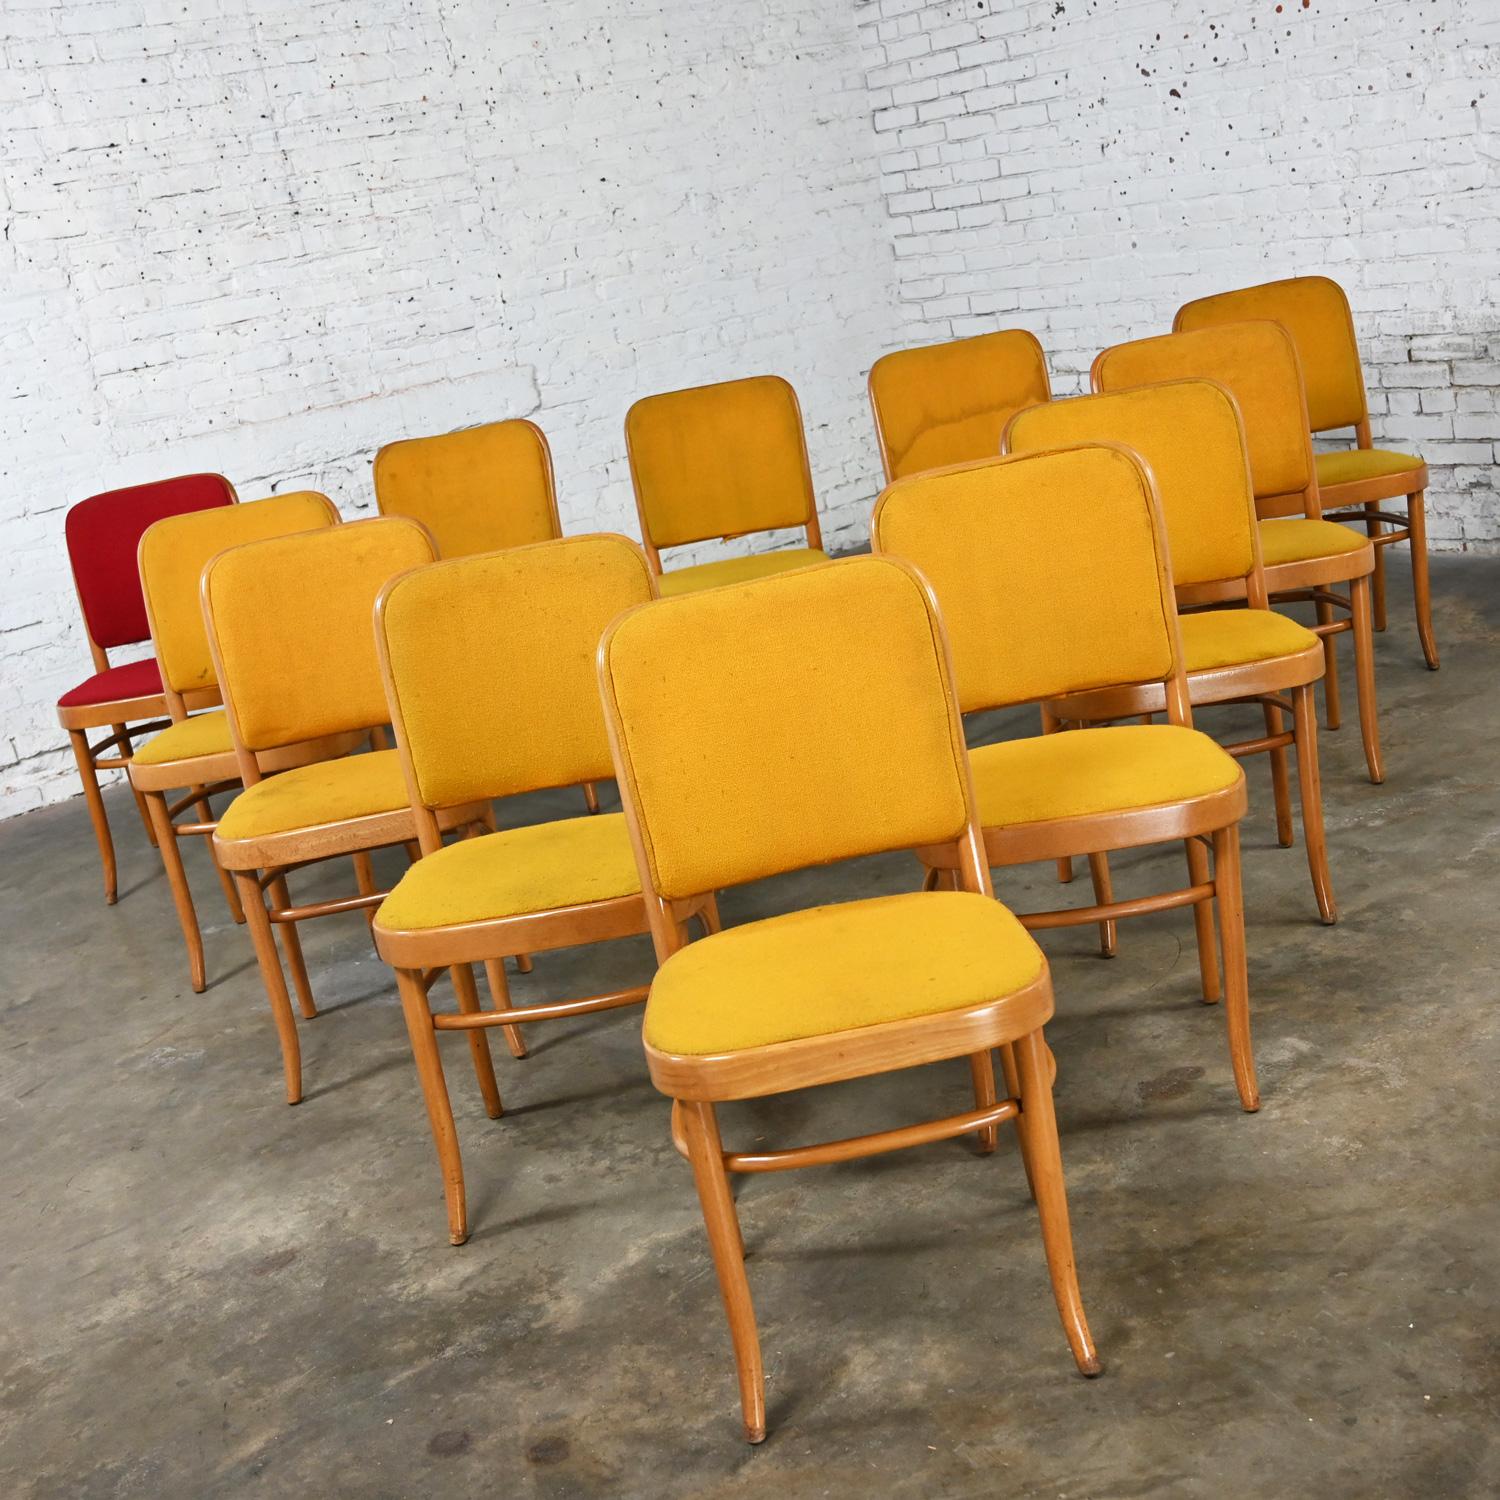 Wonderful vintage Bauhaus beech bentwood frame Thonet Josef Hoffman Prague 811 style armless side dining chairs by Falcon Products Inc., set of 12. Beautiful condition, keeping in mind that these are vintage and not new so will have signs of use and